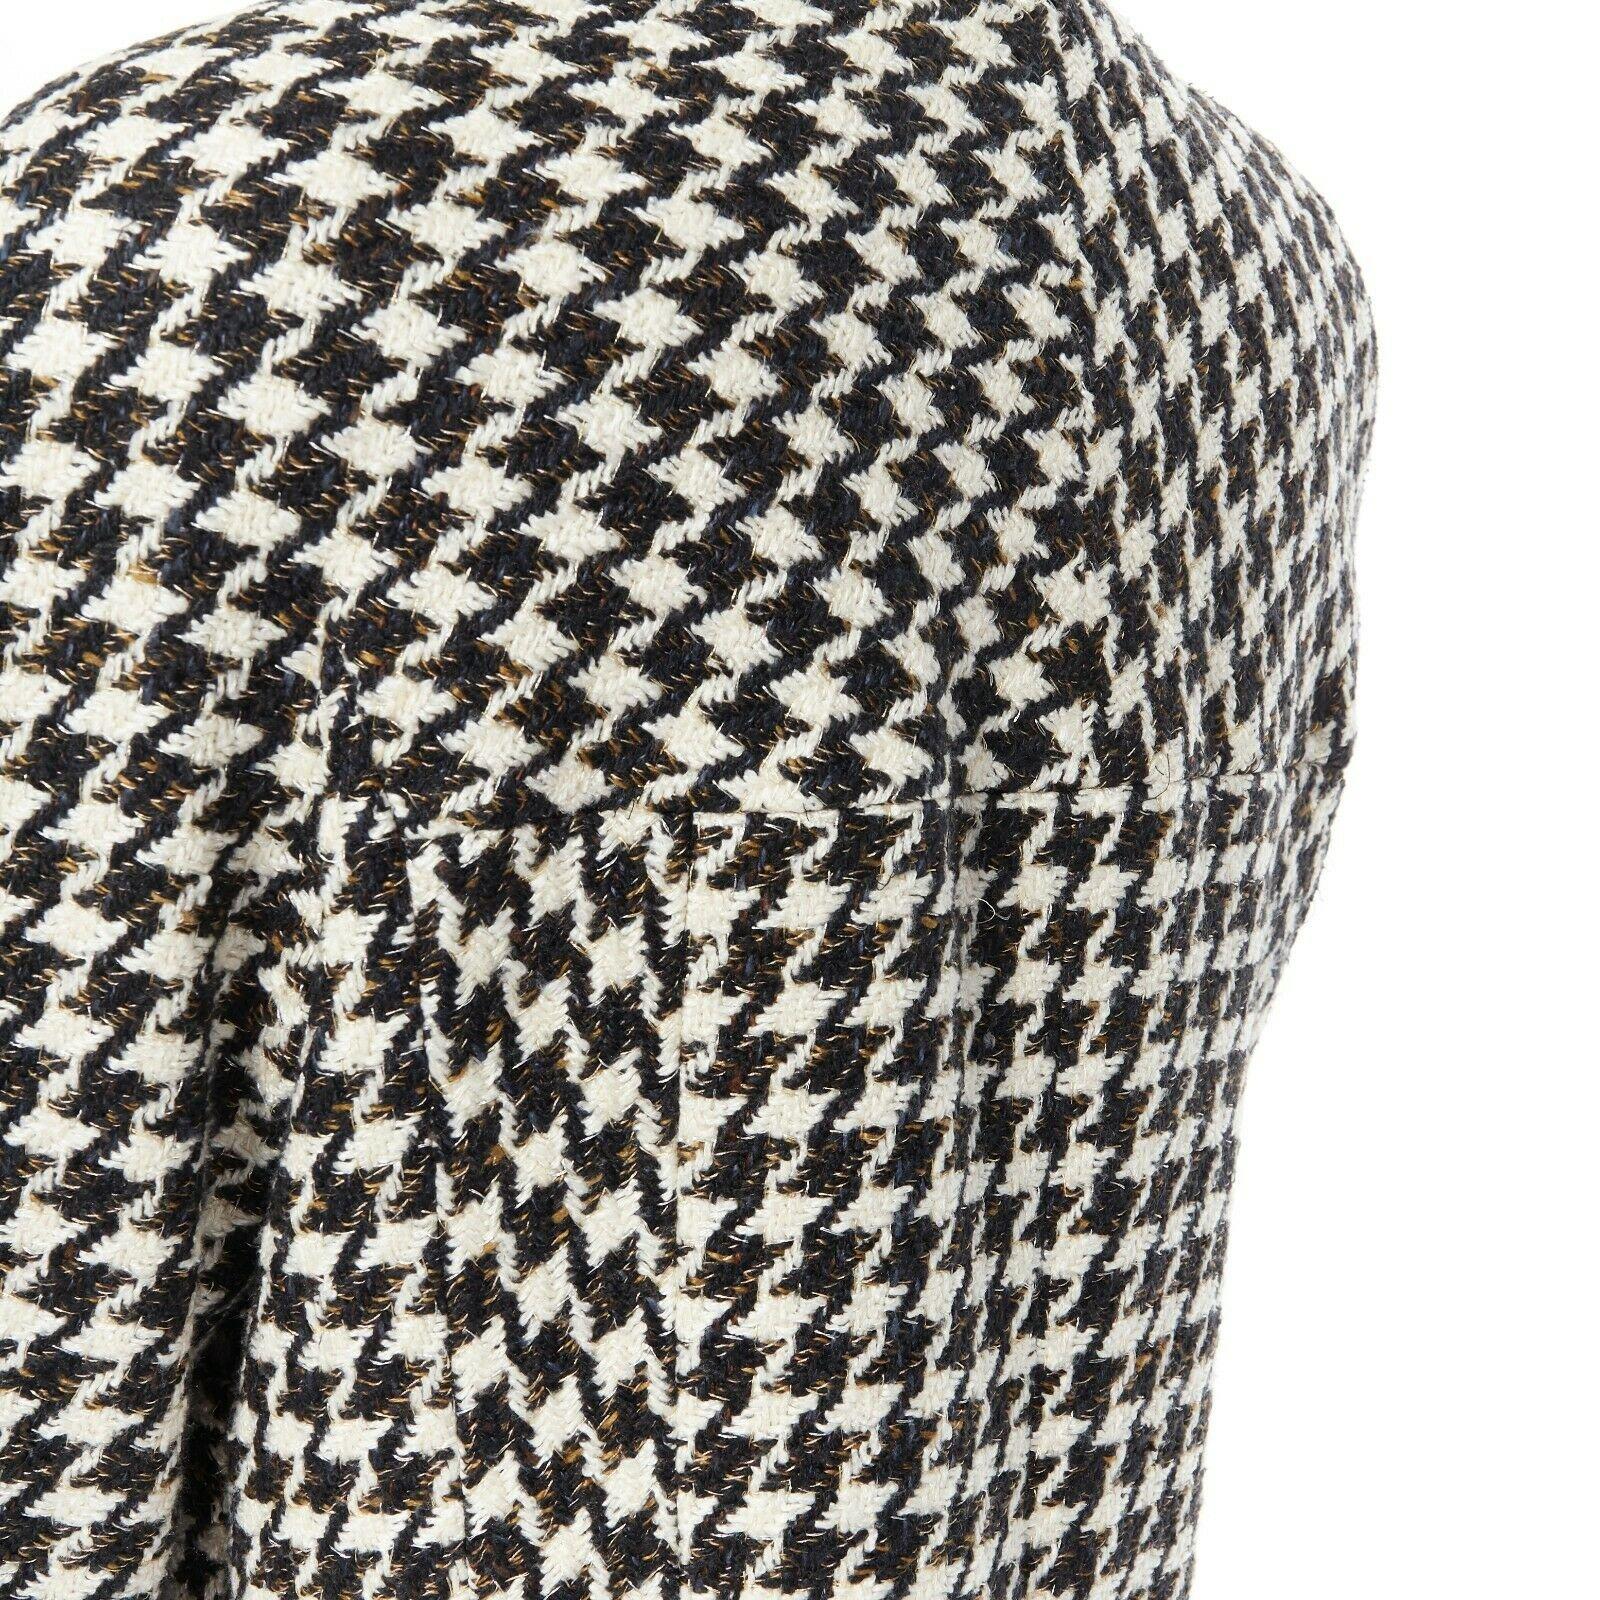 CHANEL 06P black white houndstooth tweed asymmetric wrapped front jacket FR40 6